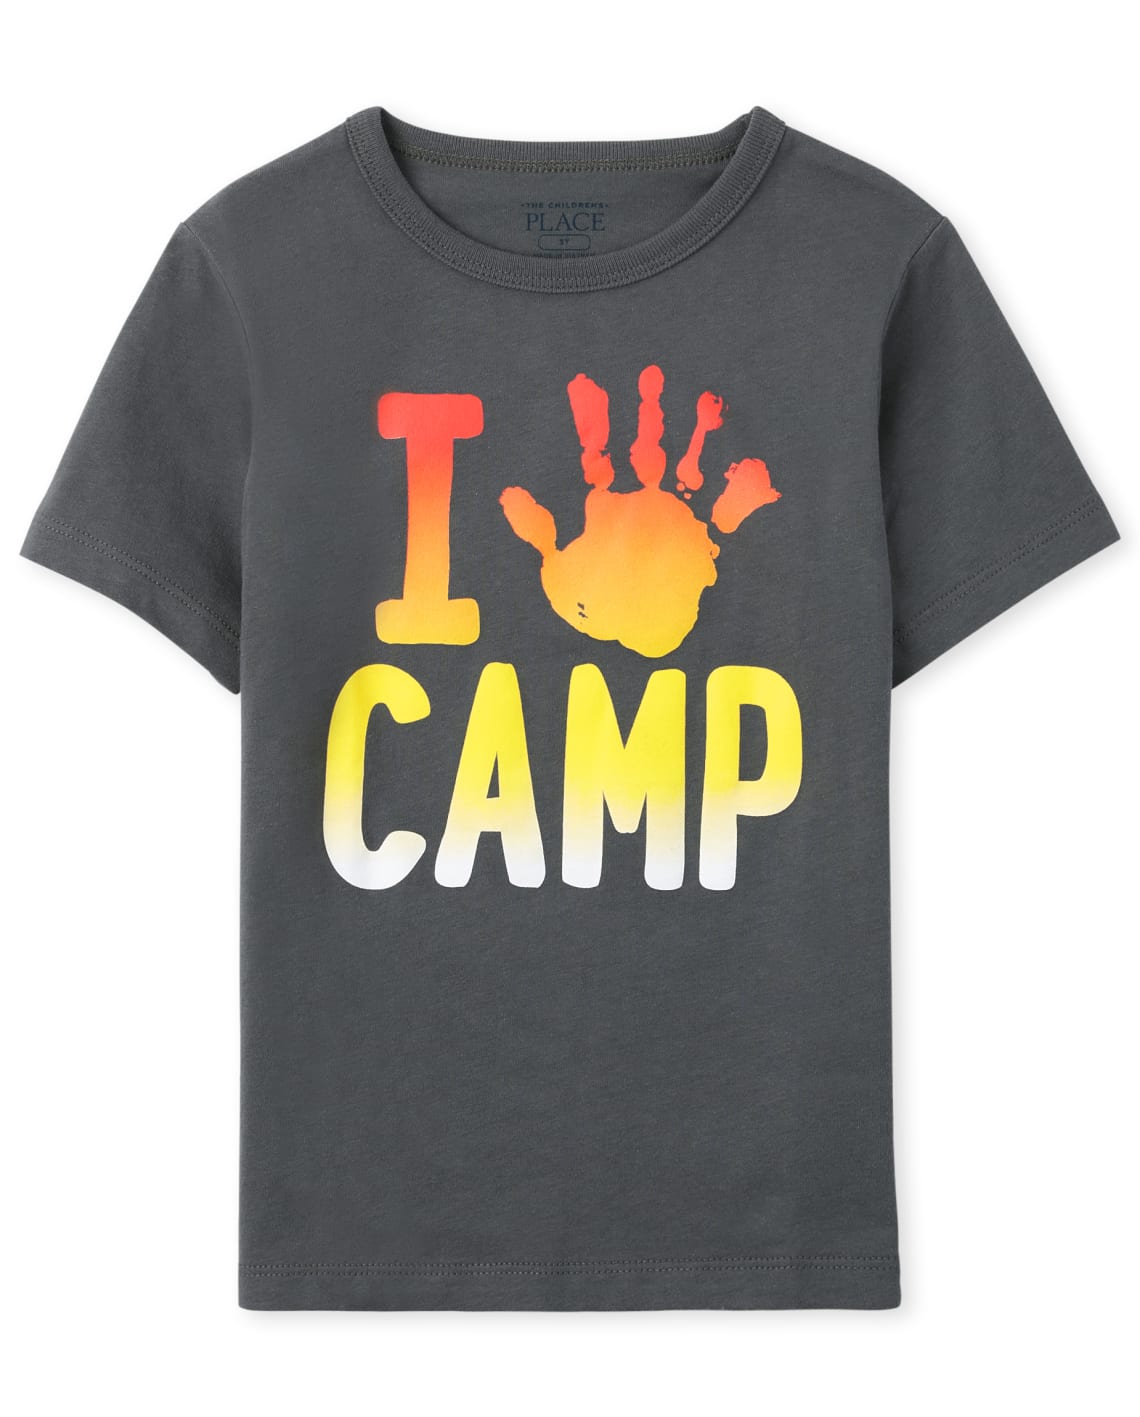 The Children's Place Toddler Boys Camp Graphic Tee (Size: 3T in Black Ice)